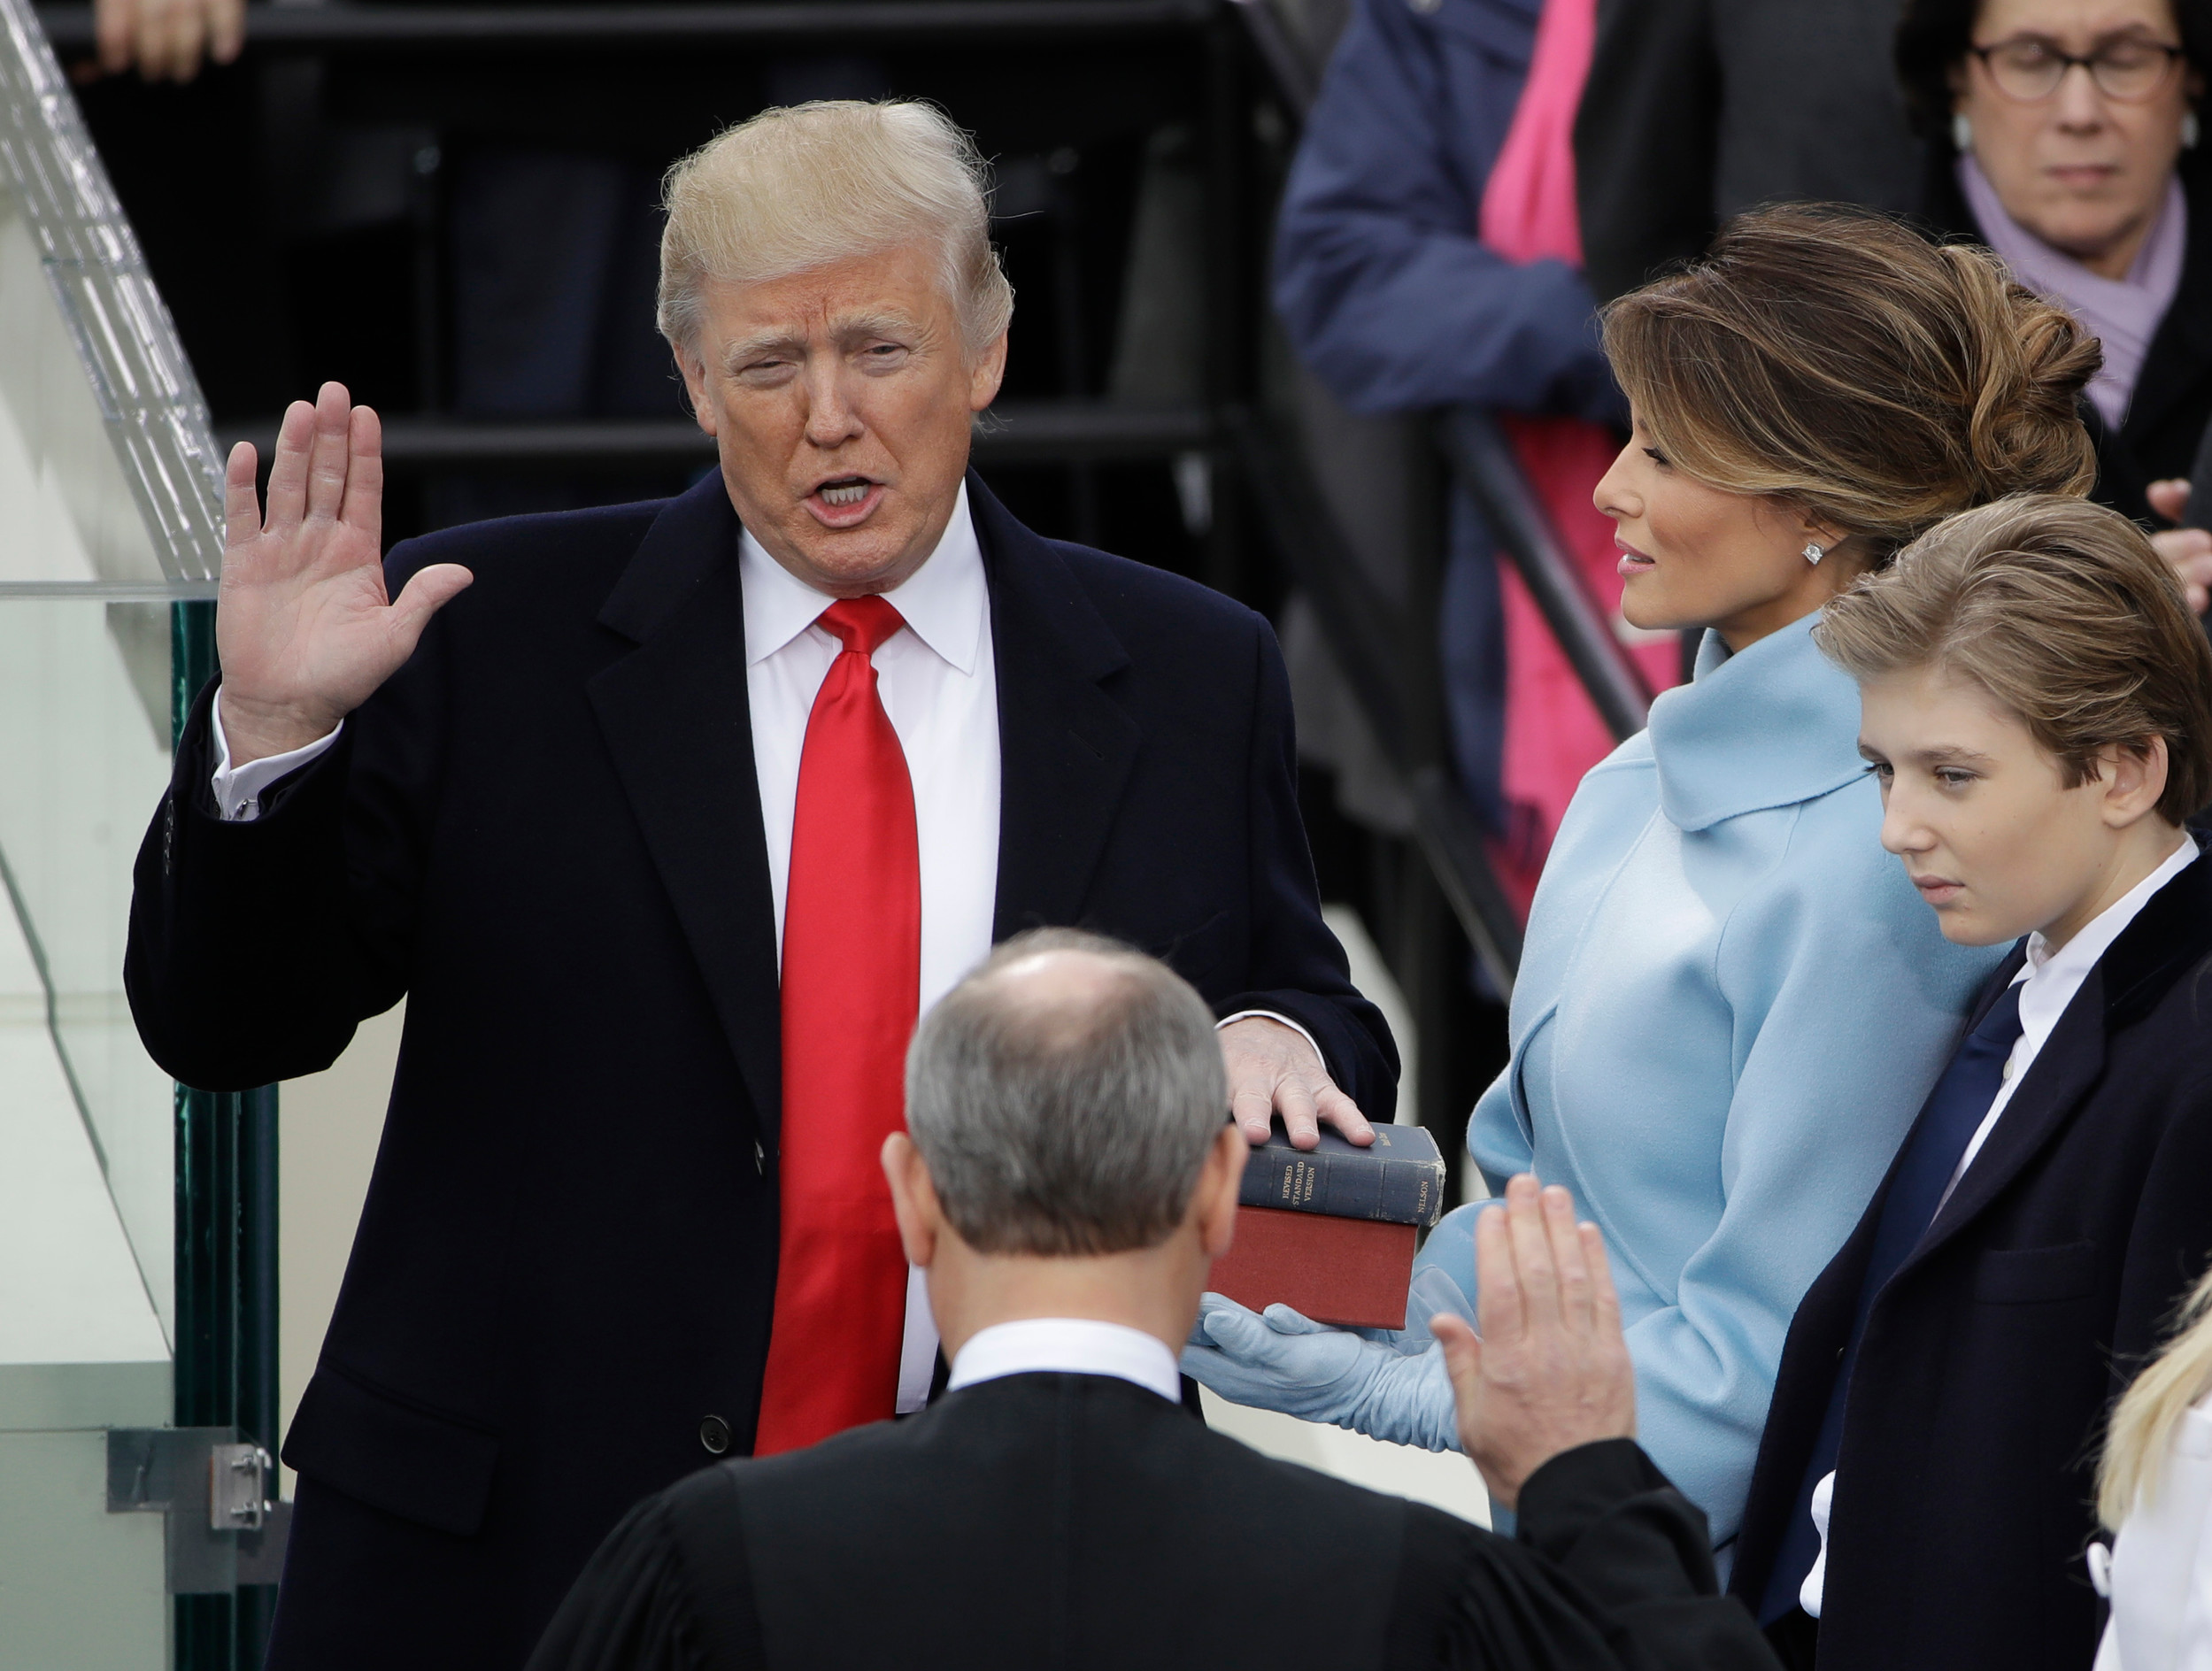 Donald Trump is sworn in as the 45th president of the United States by Chief Justice John Roberts as Melania Trump looks on during the 58th Presidential Inauguration at the U.S. Capitol in Washington on Jan. 20, 2017. Trump's inaugural committee spent more than $1 million to book a ballroom at the Trump International Hotel in the nation's capital as part of a scheme to "grossly overpay" for party space and enrich the president's own family in the process, according to a lawsuit filed Wednesday.